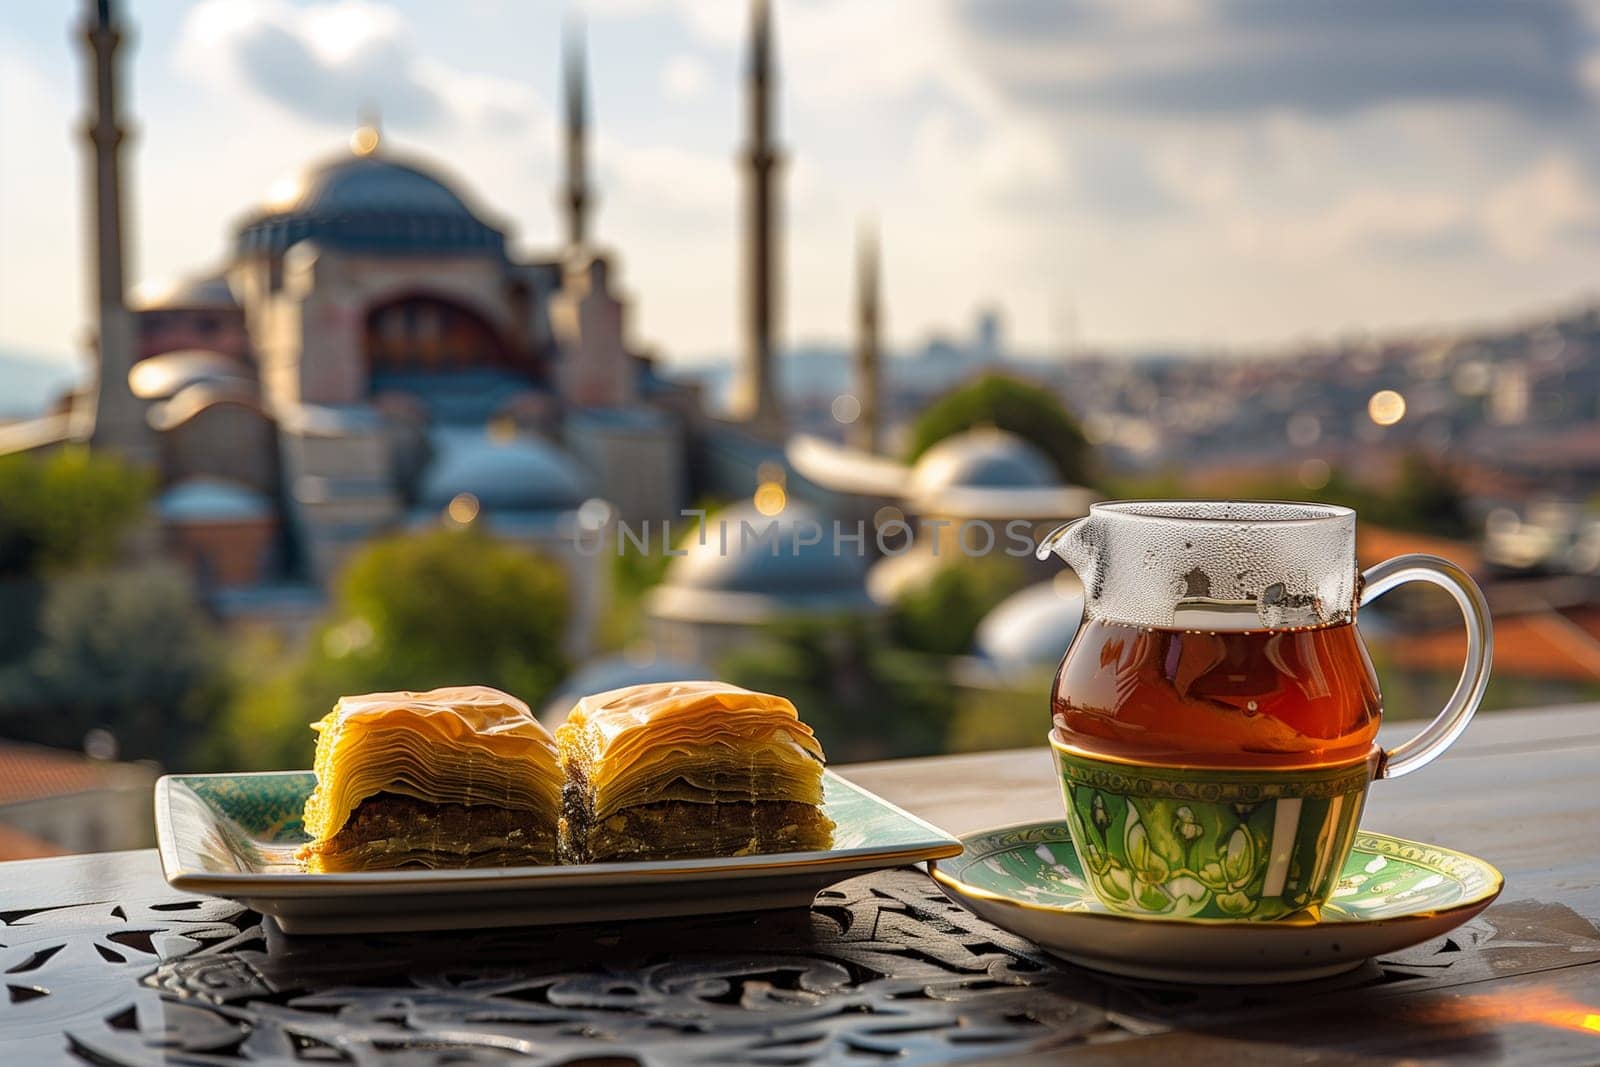 A serving of baklava and a glass of Turkish tea with a mosque and cityscape in the background, likely taken during the celebration of Kurban Bayram.